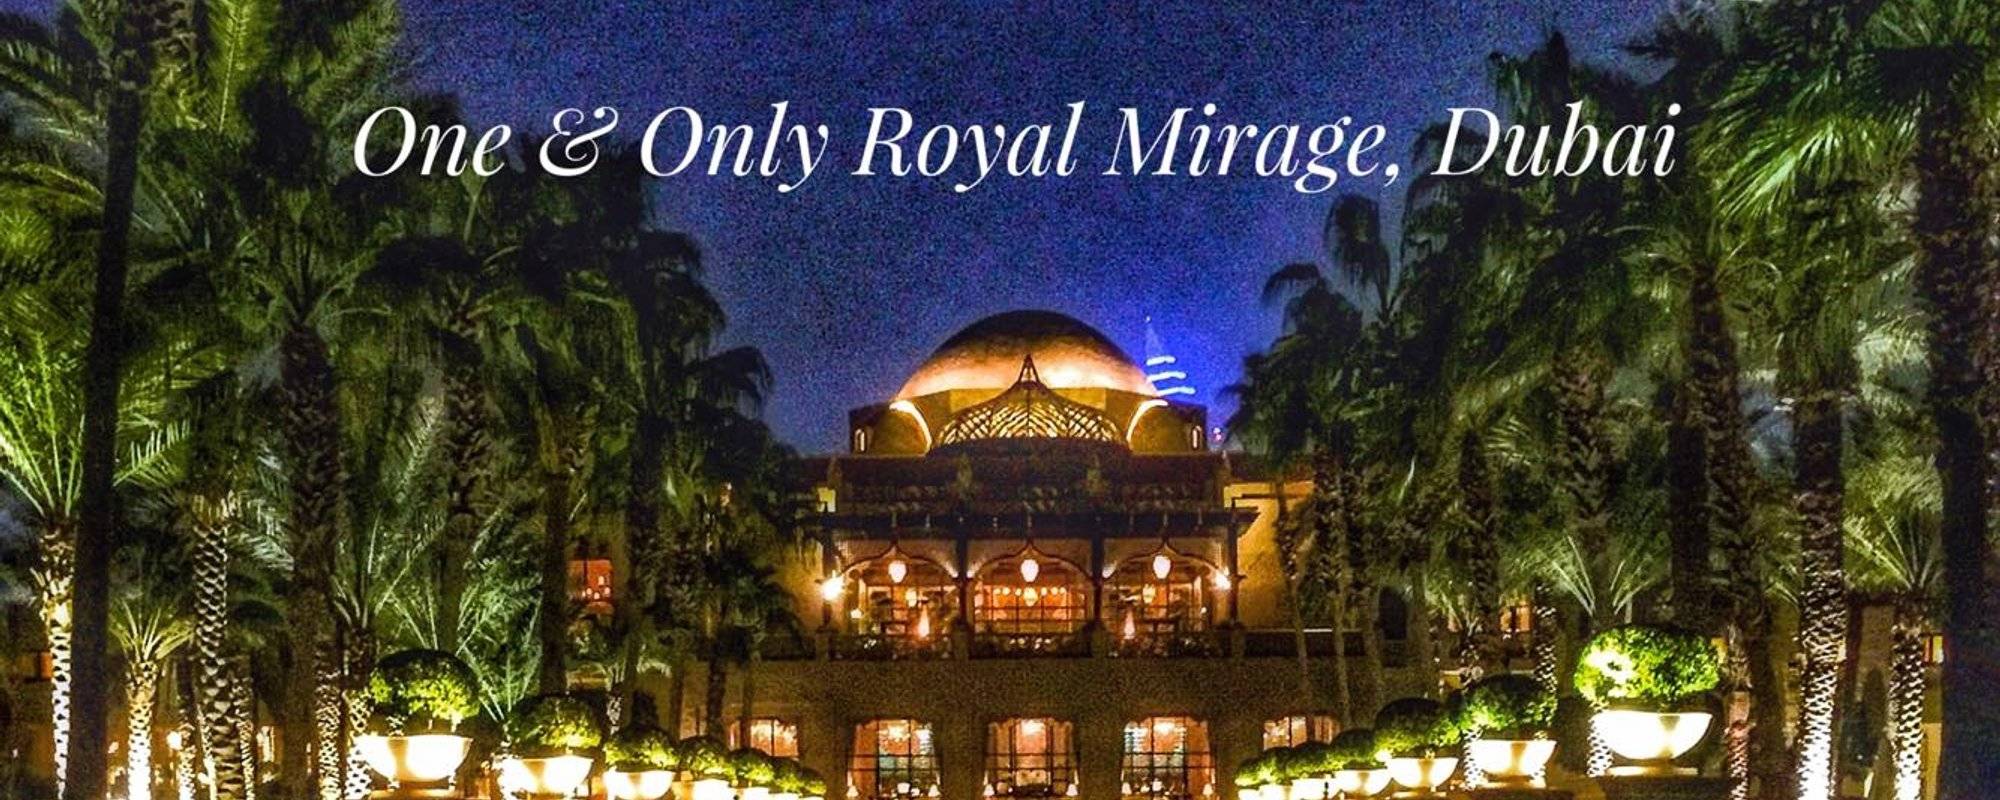 Food Blog: Dinner at One & Only Royal Mirage Palace, Dubai